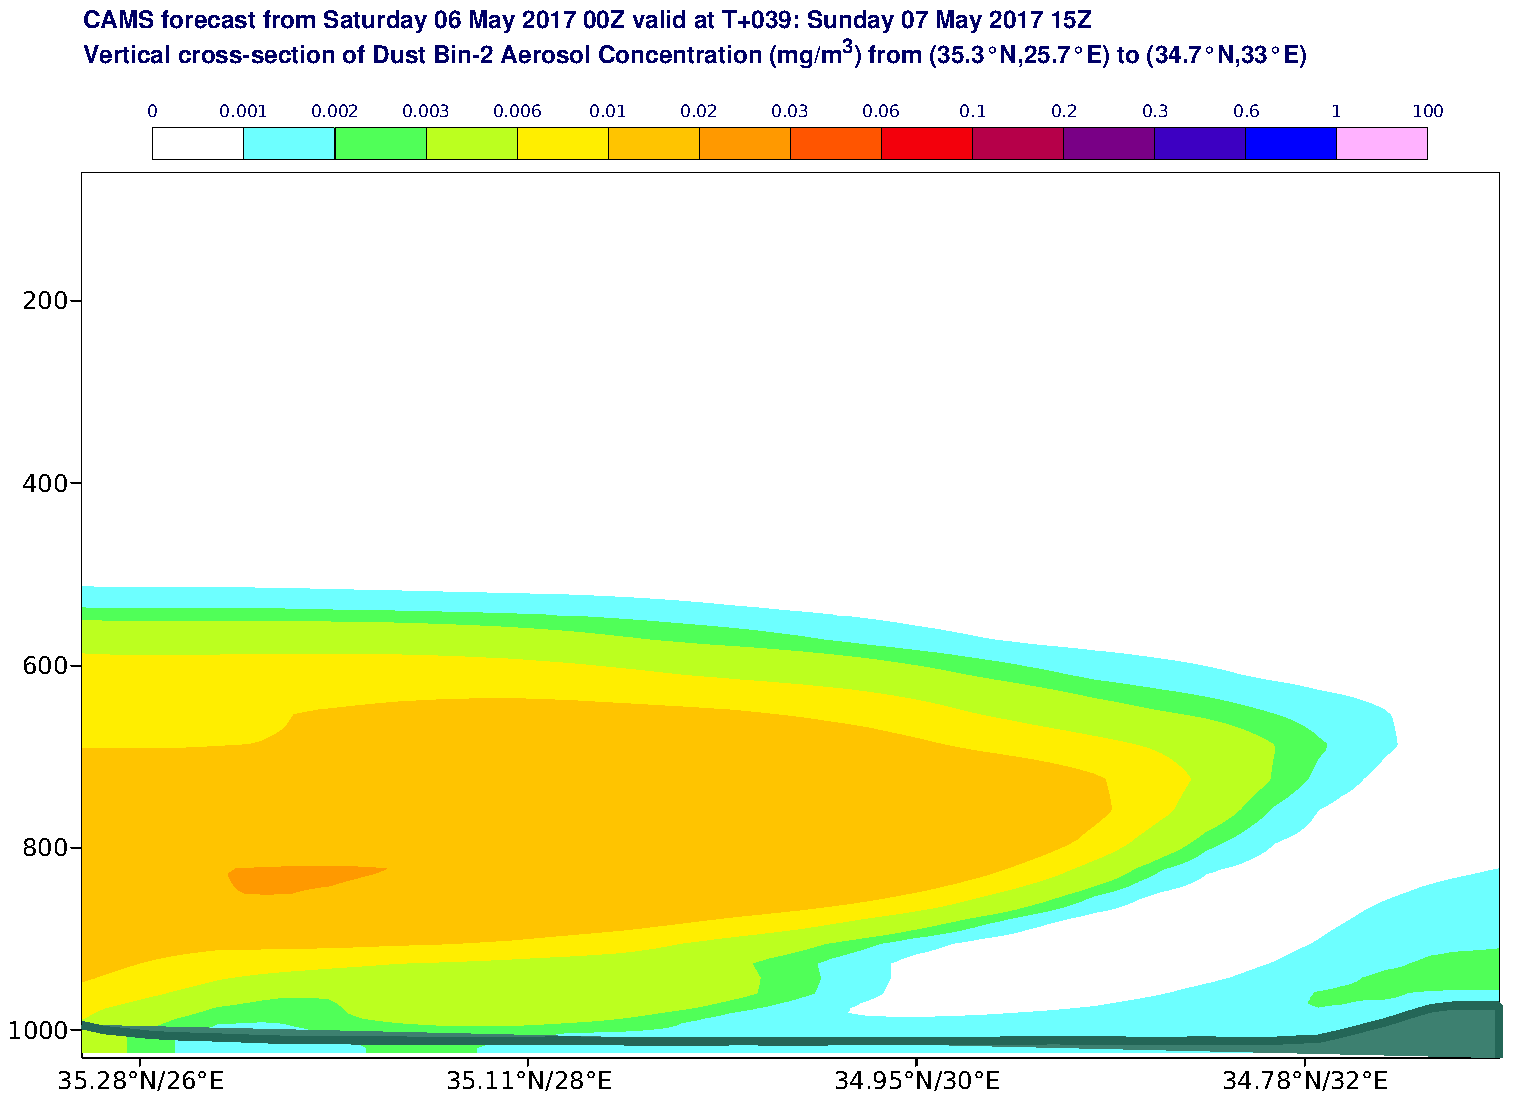 Vertical cross-section of Dust Bin-2 Aerosol Concentration (mg/m3) valid at T39 - 2017-05-07 15:00